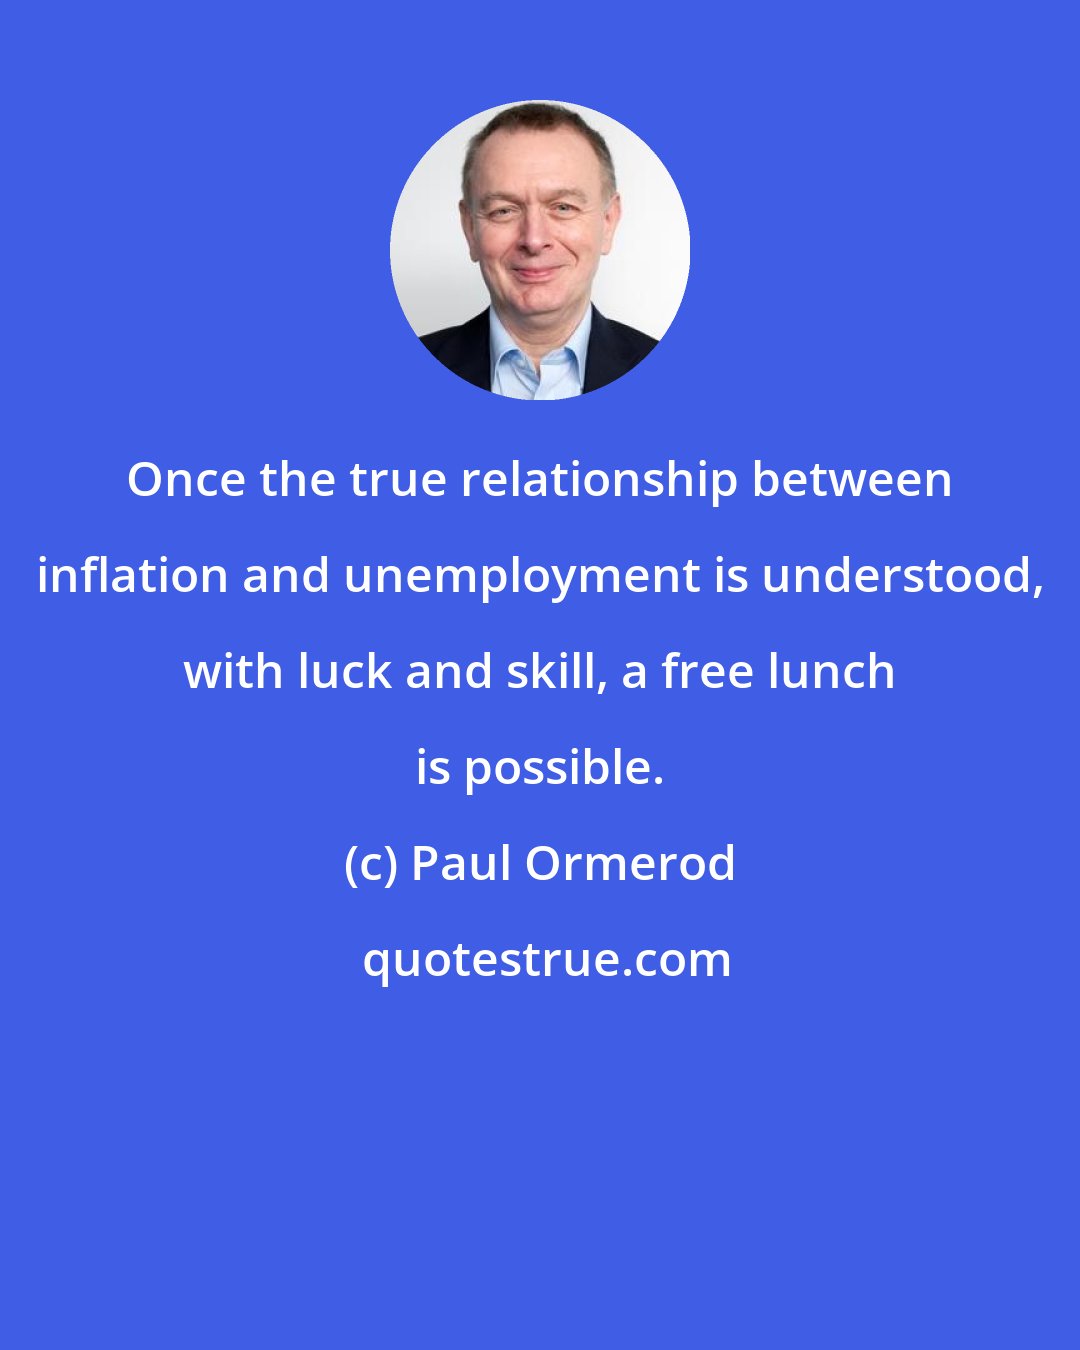 Paul Ormerod: Once the true relationship between inflation and unemployment is understood, with luck and skill, a free lunch is possible.